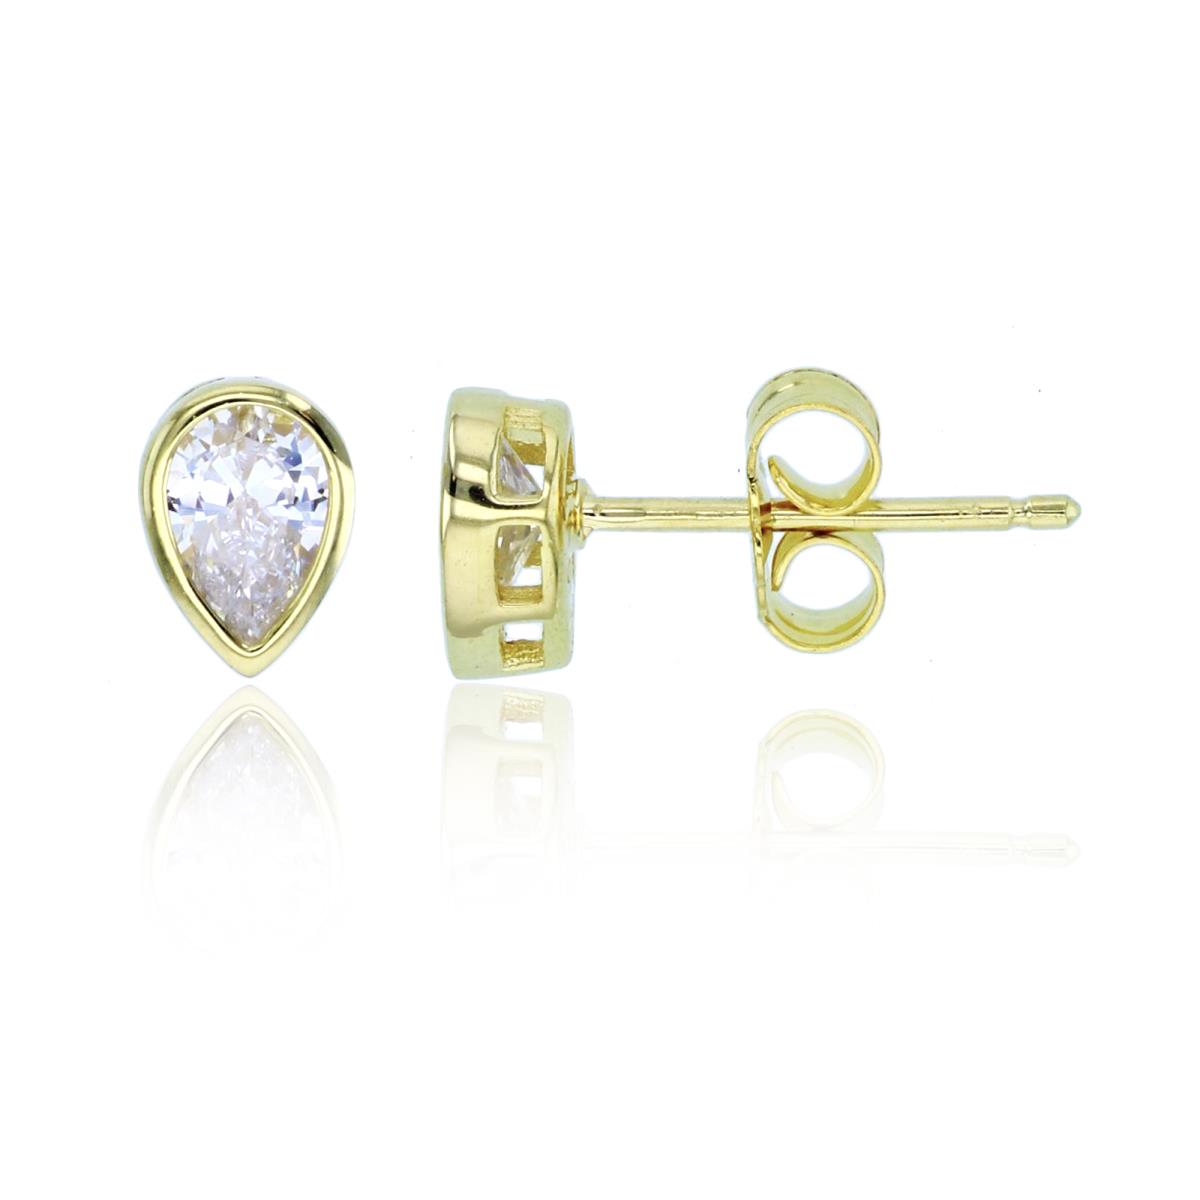 Sterling Silver+1Micron Yellow Gold 6x4mm Pear-shaped CZ Bezel Studs